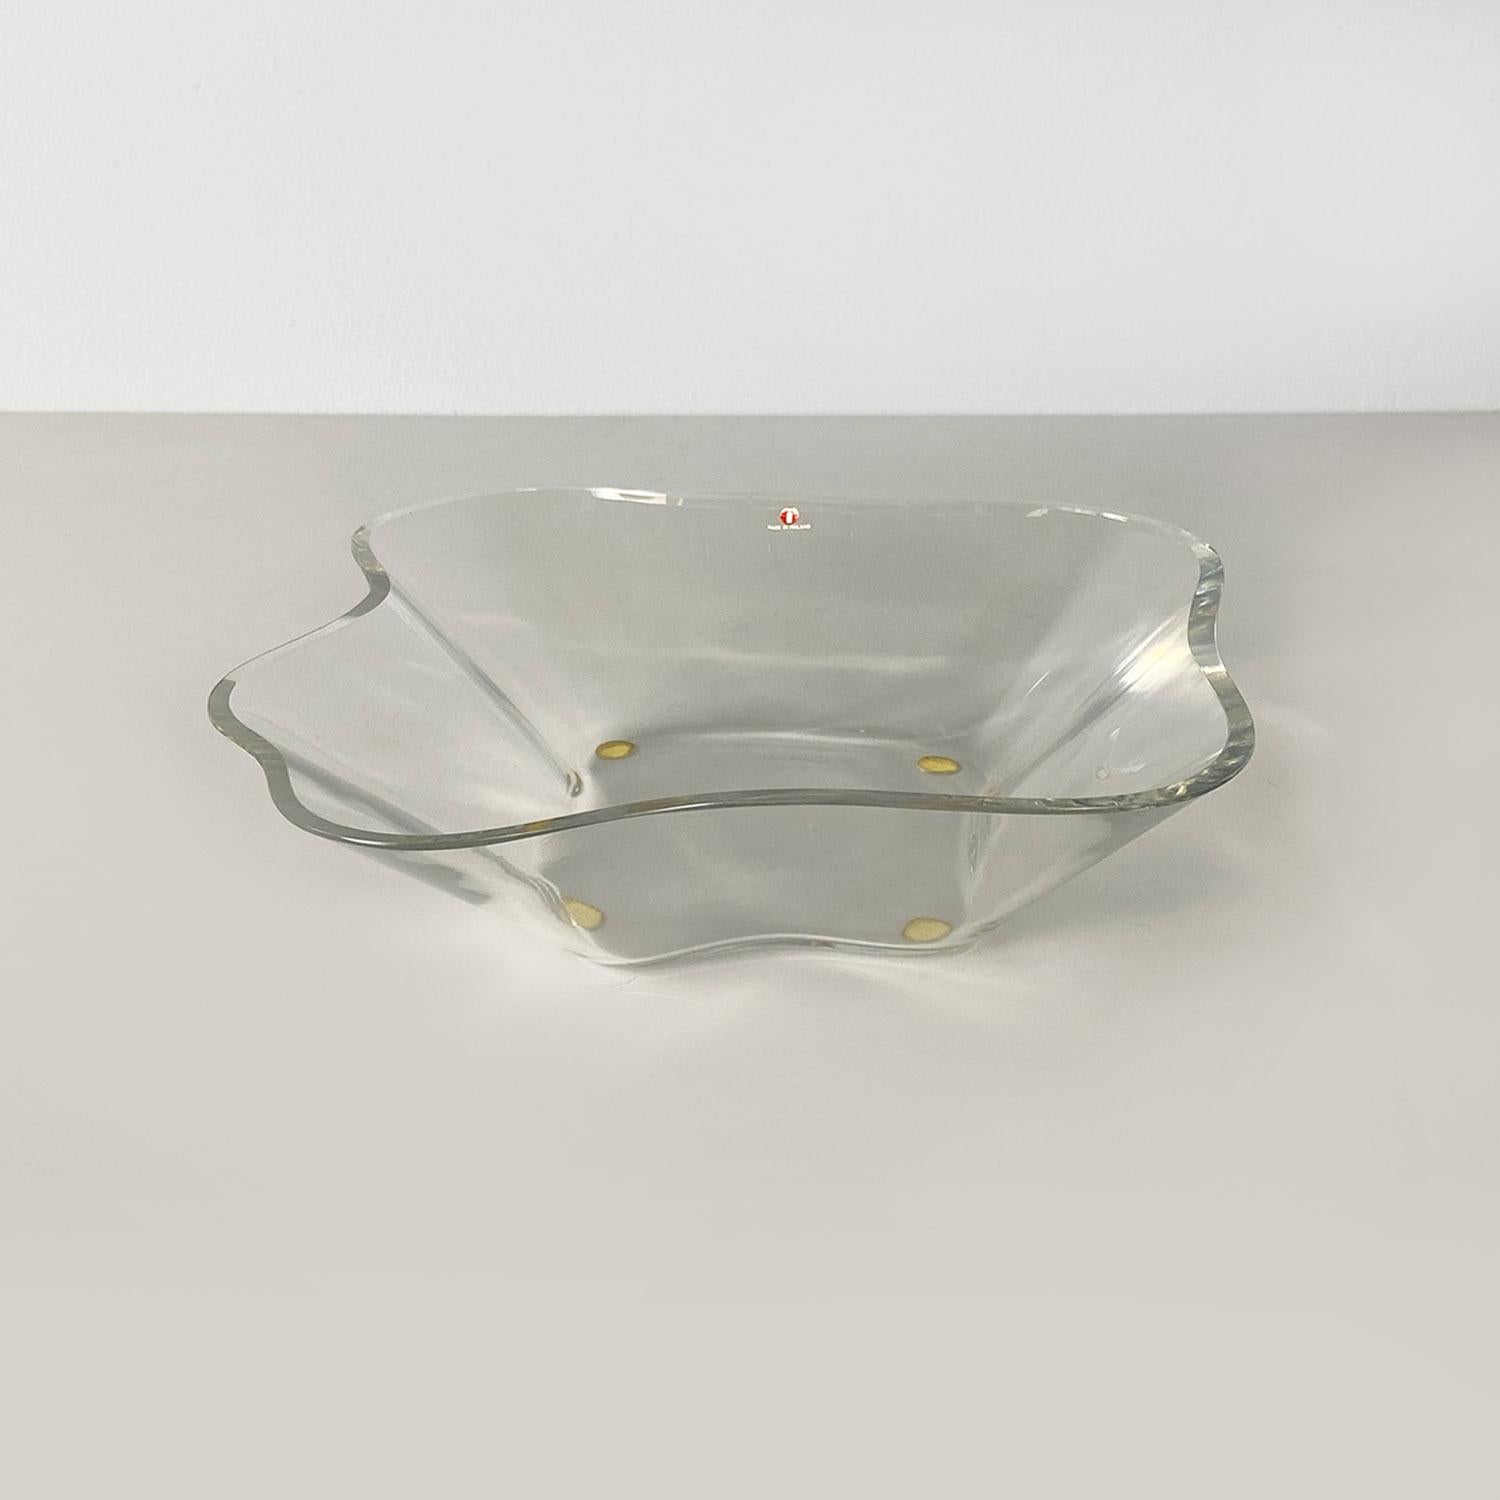 Centerpiece bowl or low vase of Finnish provenance, made entirely of glass and with an irregular, wavy shape.
Design by Alvar Aalto for Ittala, c. 1990 with production label and designer's acid signature on the bottom.
Good condition, free of major